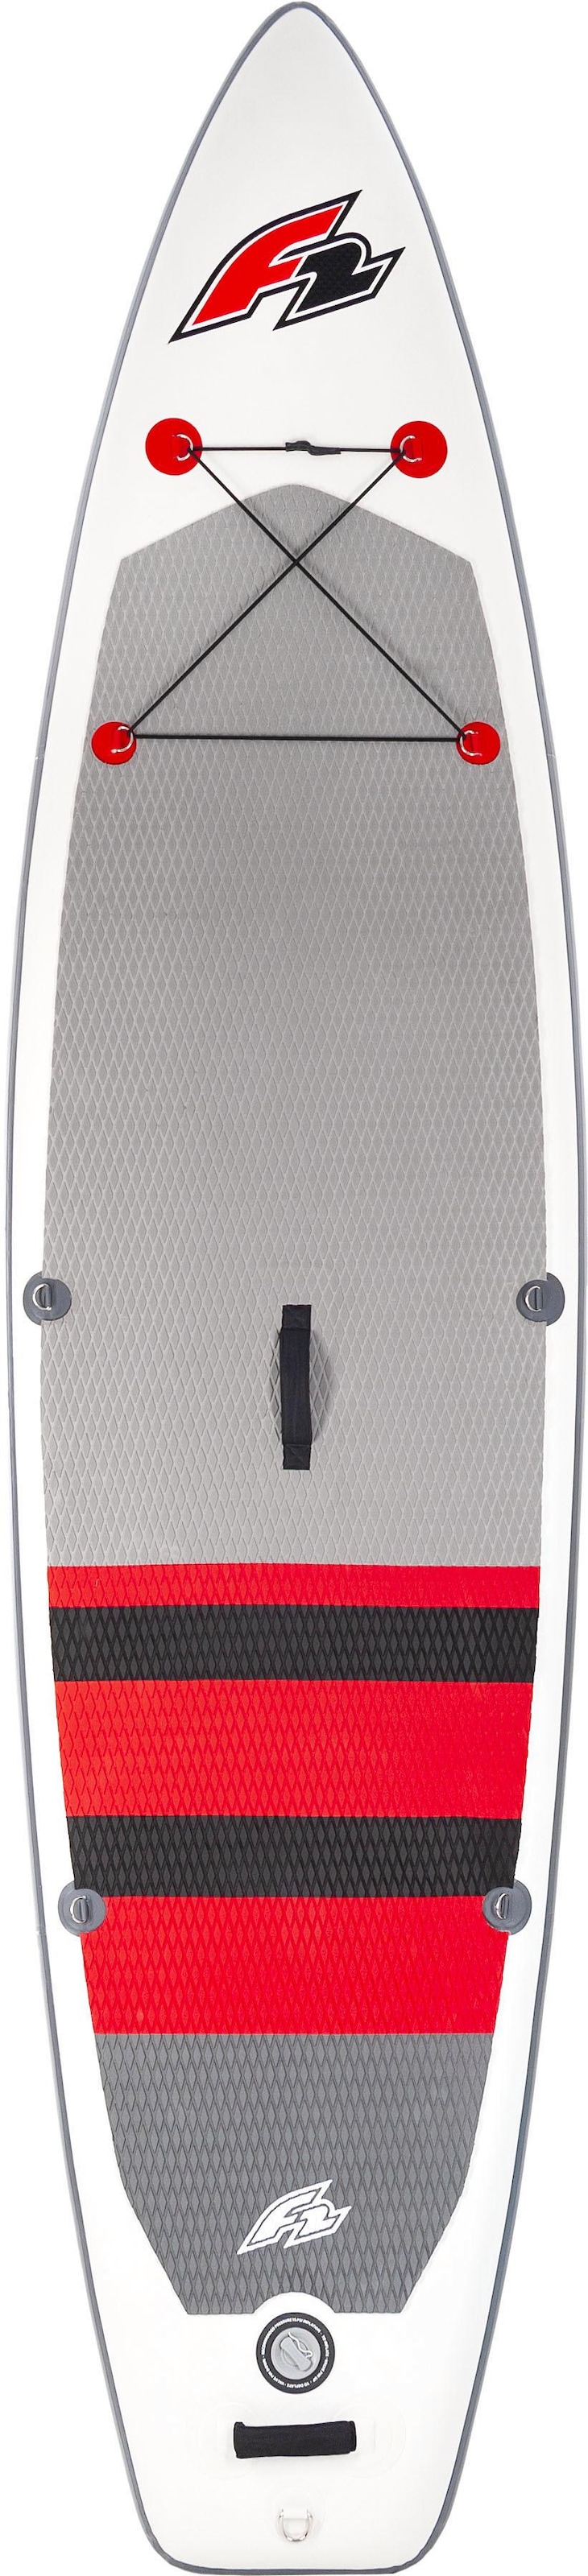 F2 Inflatable SUP-Board (Set, Up Stand tlg.), »Union 5 11,5«, Paddling bei